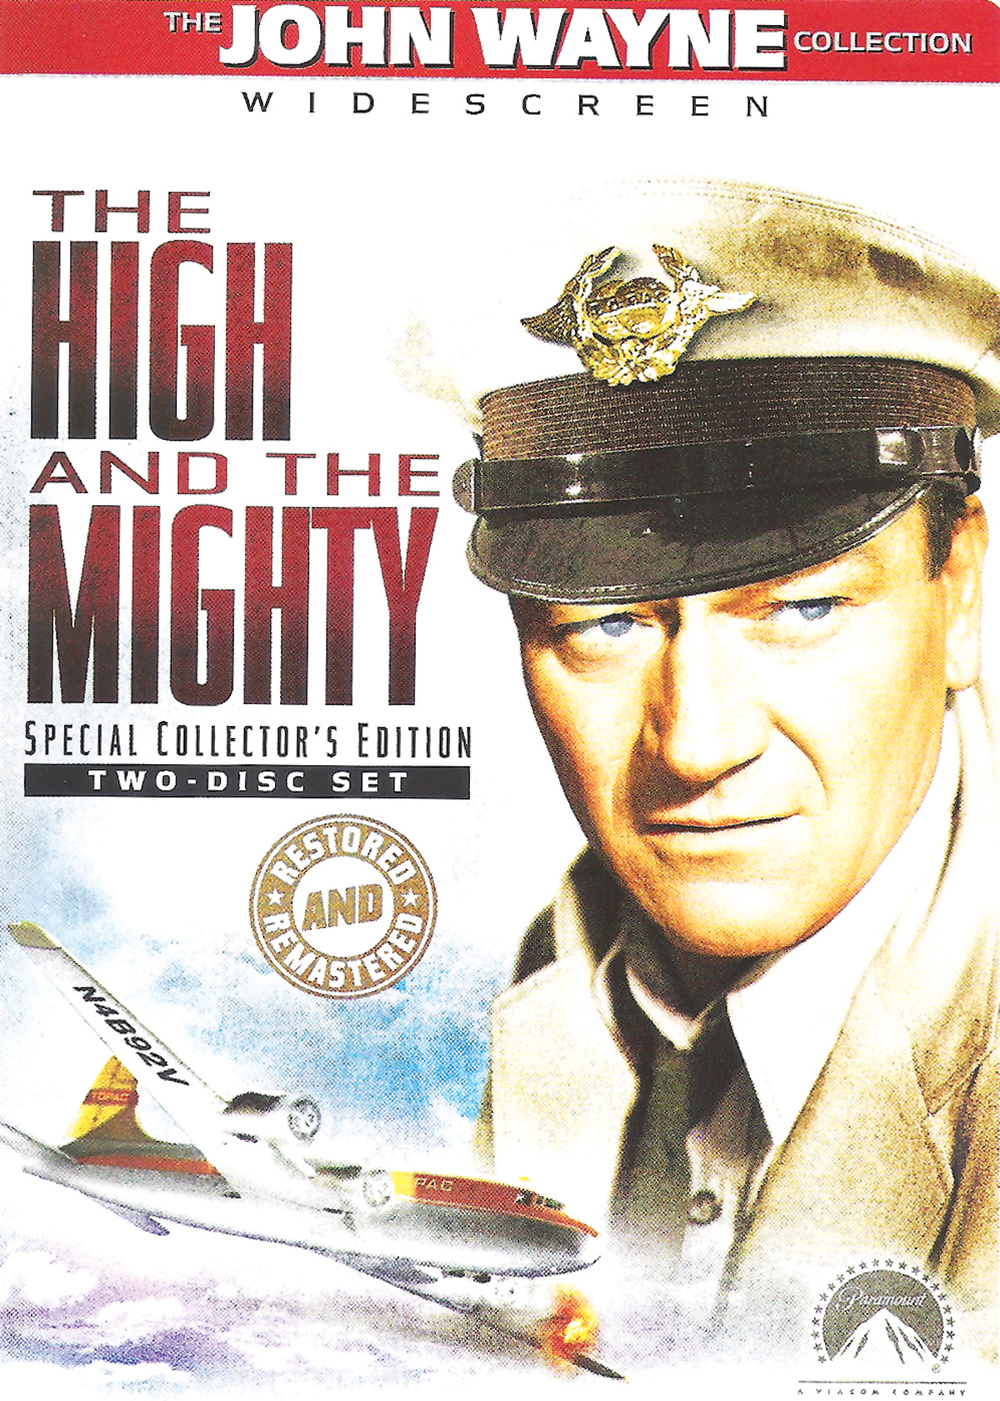 Former Airline Pilot Remembers the Filming of “The High and the Mighty”